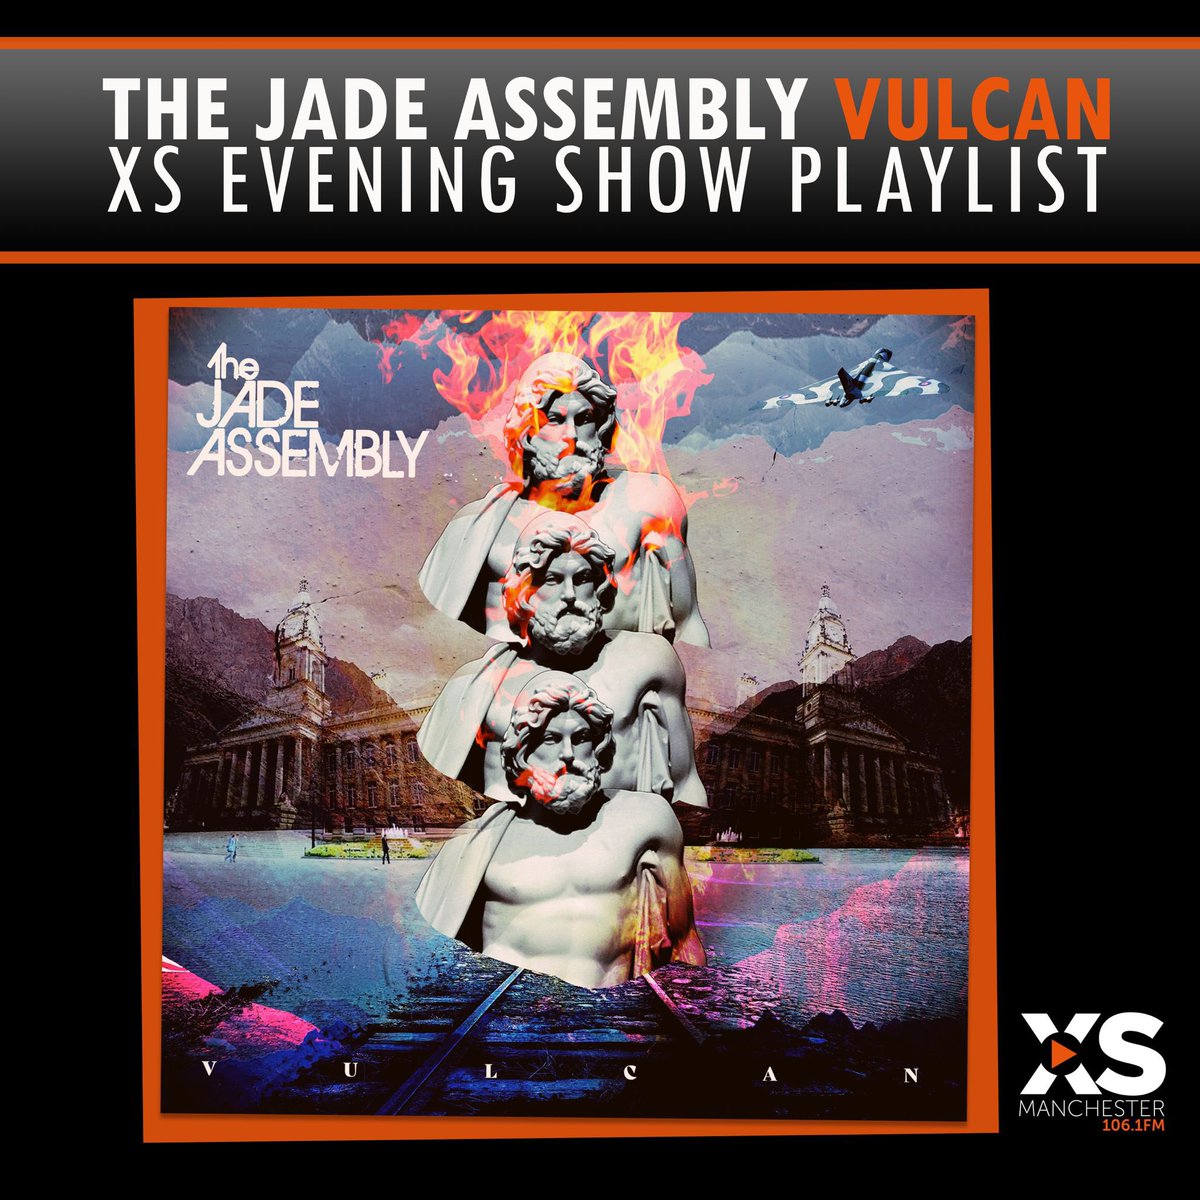 Our latest Single Vulcan has been added to the @XSManchester evening show playlist with our good pals @project_shed 🟠⚫️ Thanks to everyone who downloaded so far and a massive thanks to everyone who came to see us last night at @FerretPreston with the awesome @cloudsanderrors